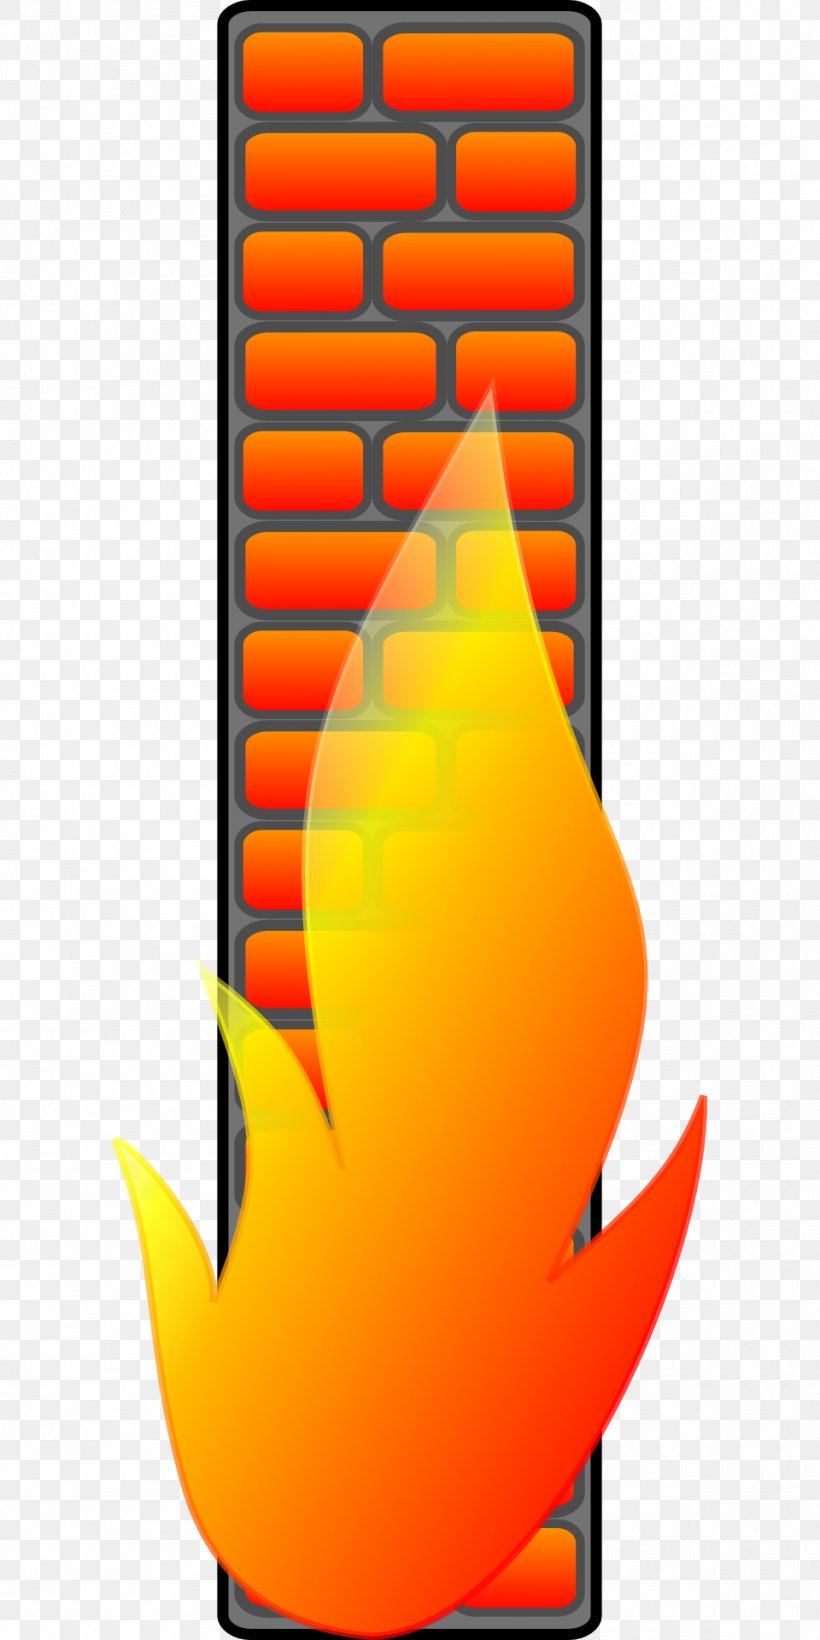 Clip Art Firewall Openclipart Computer Network, PNG, 960x1920px, Firewall, Computer, Computer Network, Computer Security, Computer Software Download Free